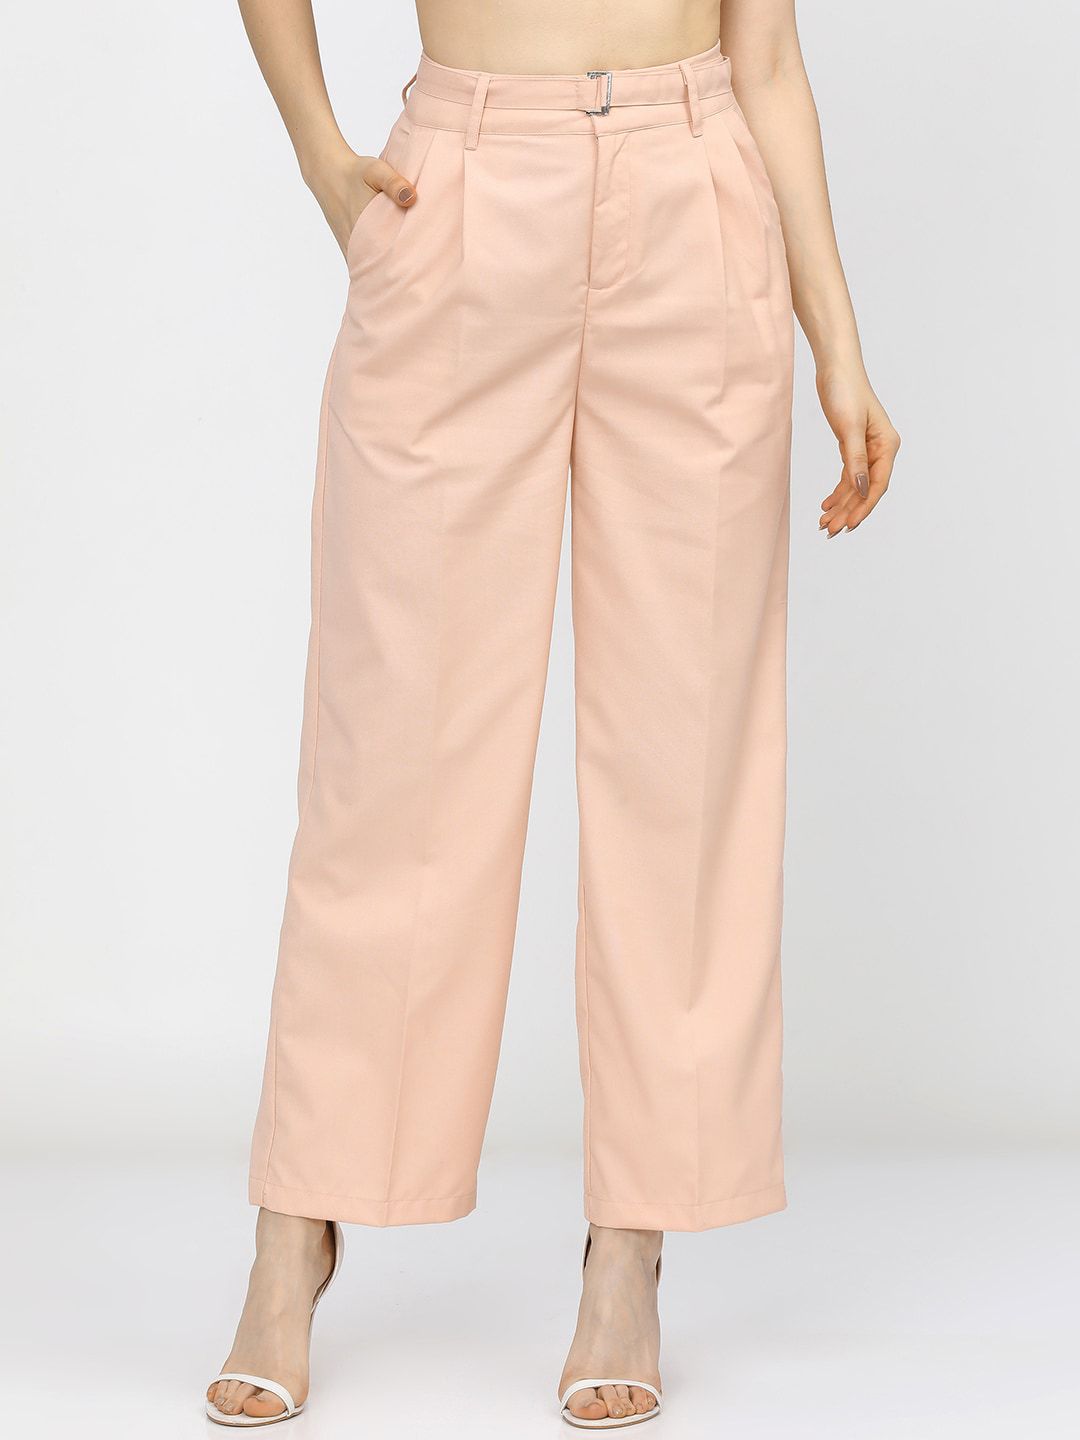 Tokyo Talkies Women Peach-Coloured Flared Pleated Trousers Price in India